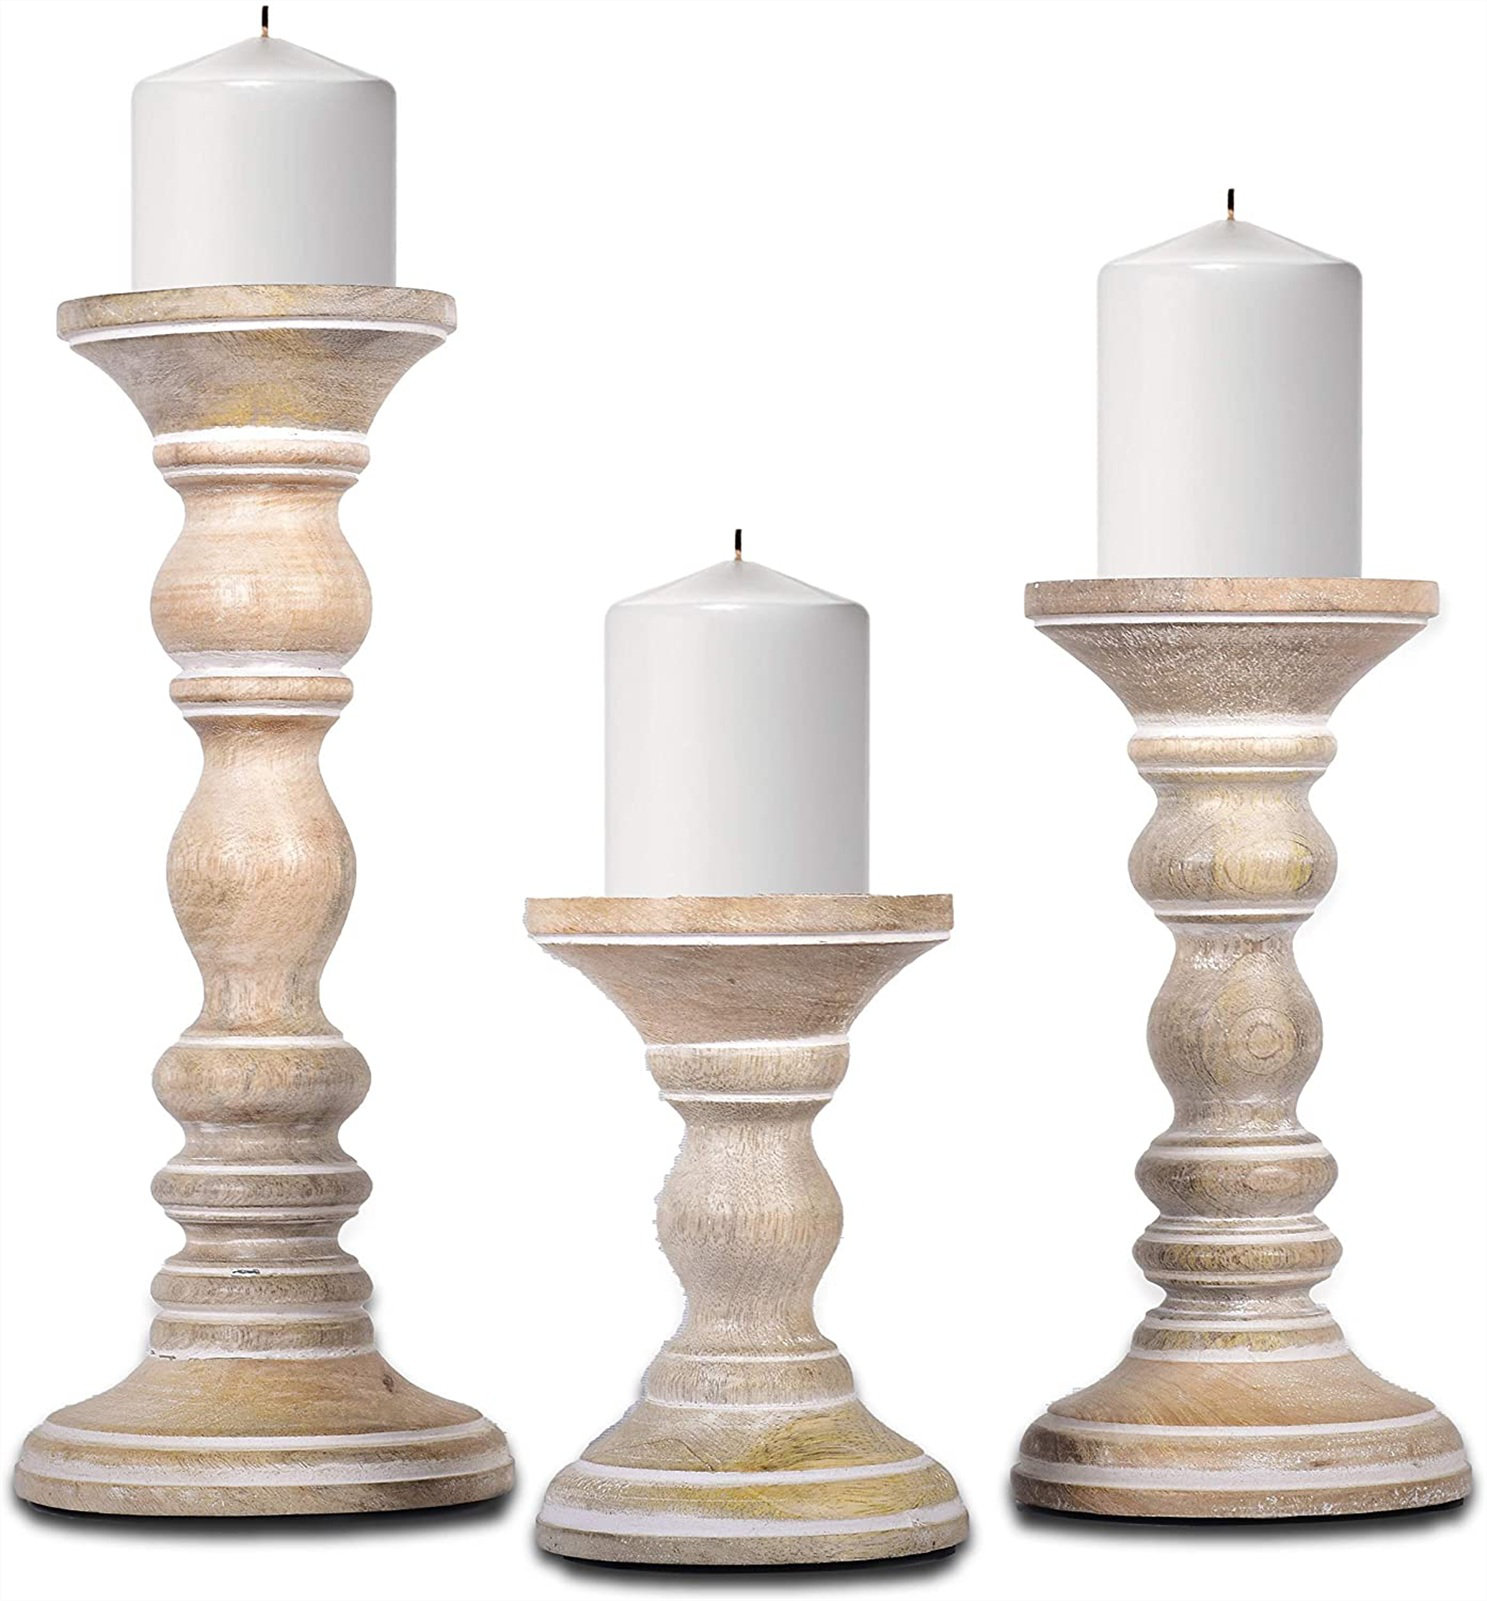 Farmhouse Pottery Essex Wooden Candlestick Holders, 2 Colors, 3